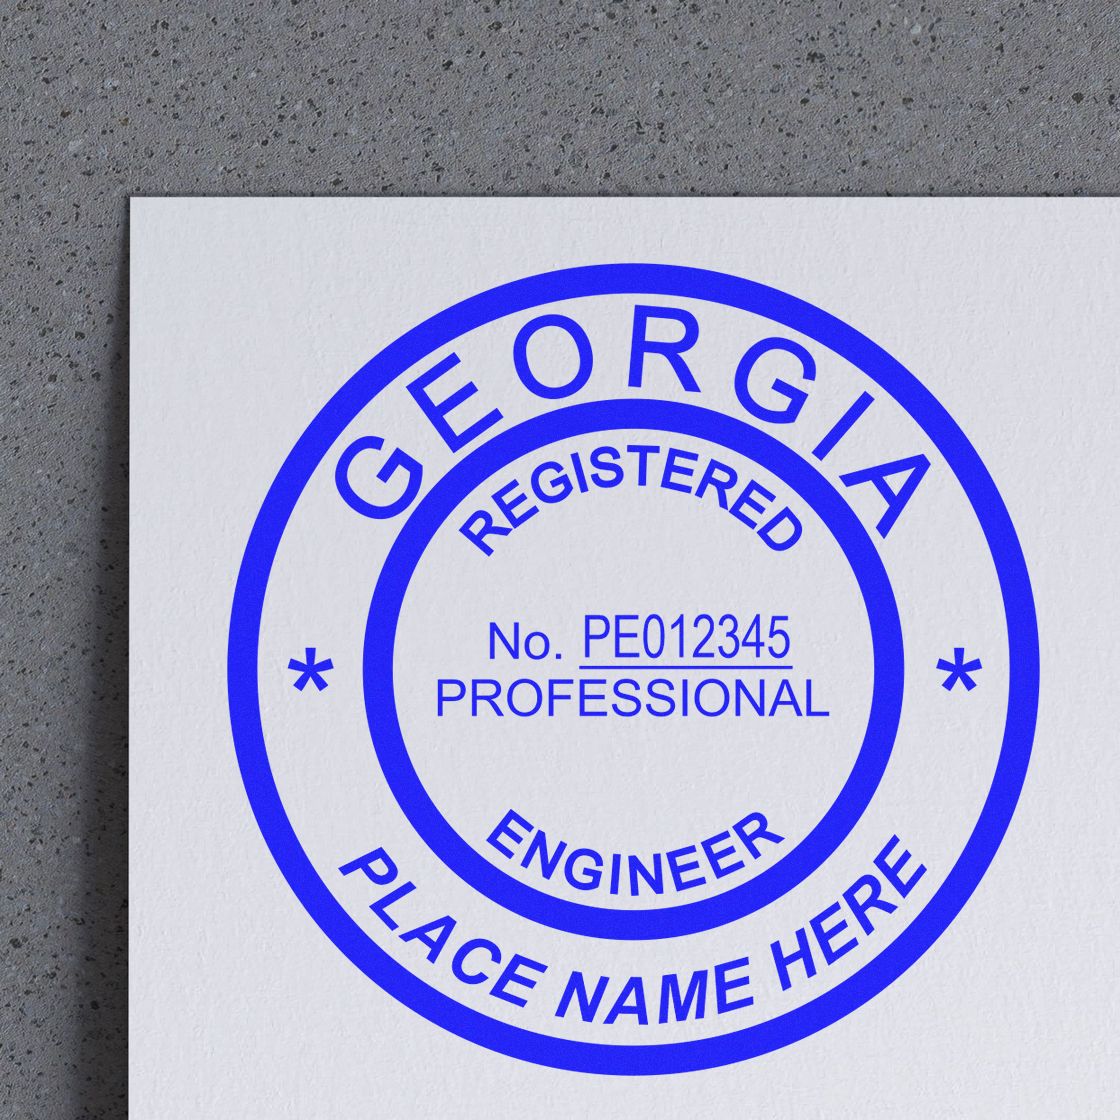 The Slim Pre-Inked Georgia Professional Engineer Seal Stamp stamp impression comes to life with a crisp, detailed photo on paper - showcasing true professional quality.